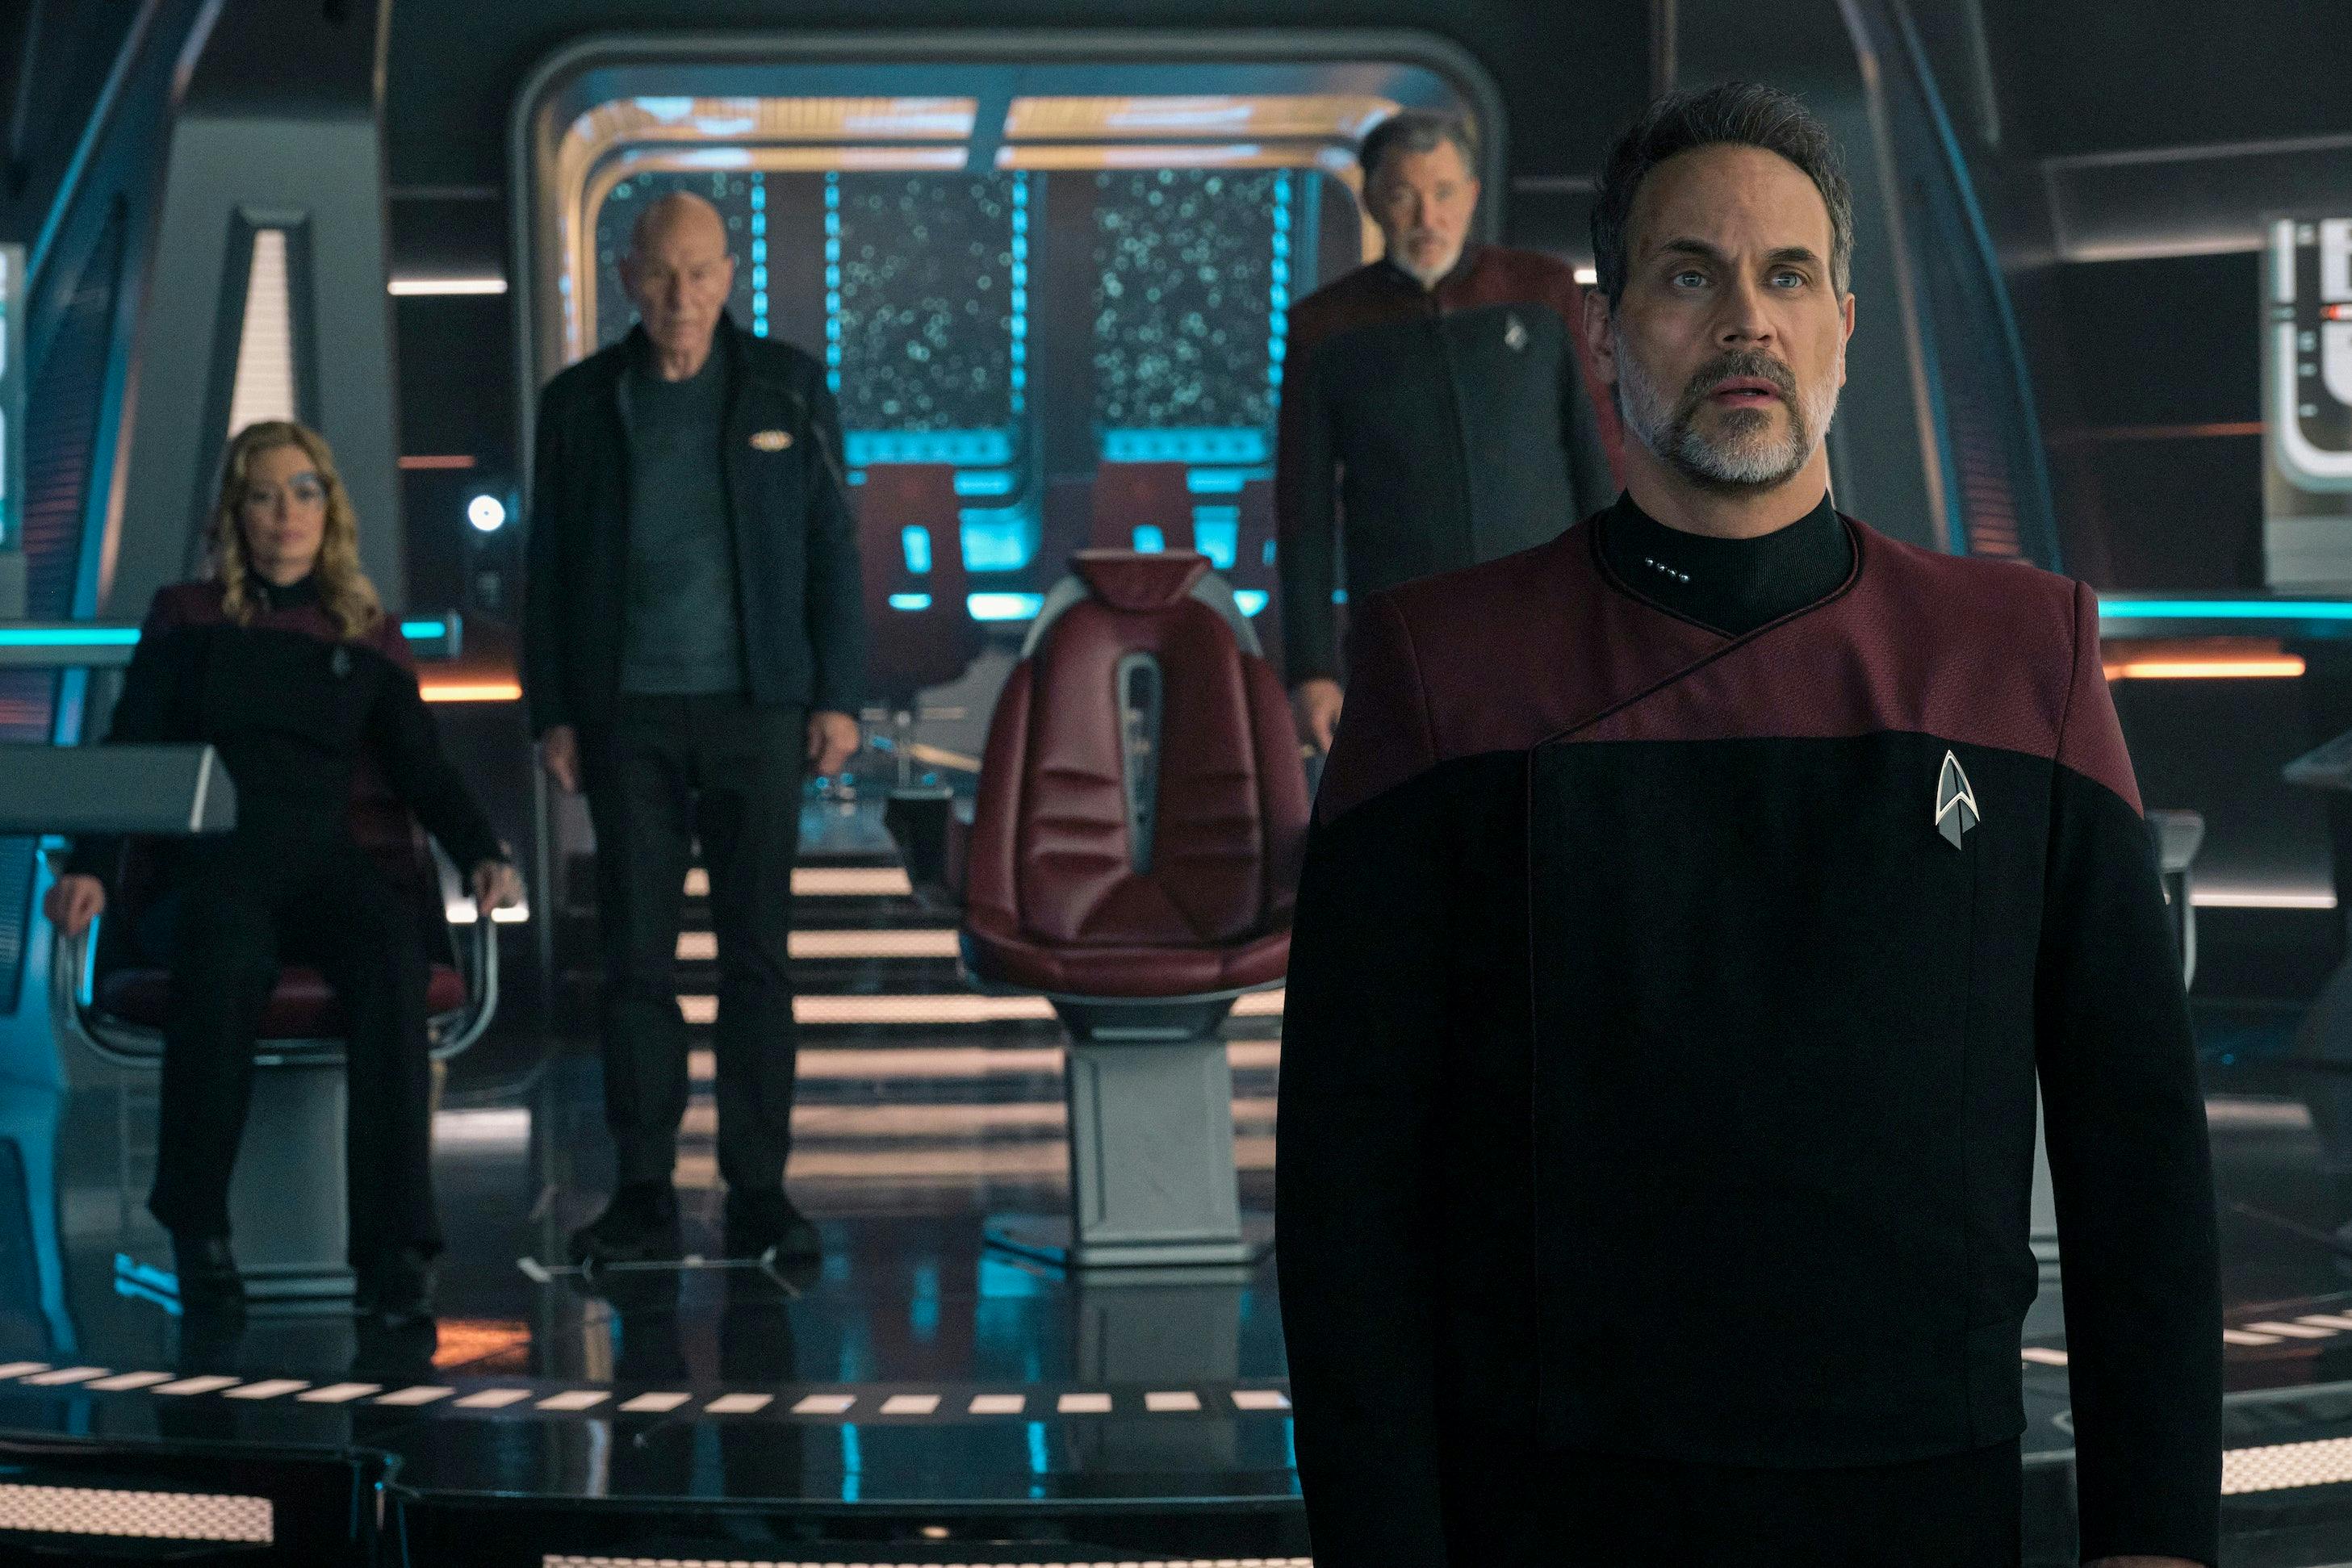 On the bridge of the Titan, Commander Seven, Picard, Riker, and Shaw are locked on the viewscreen ahead of them on Star Trek: Picard